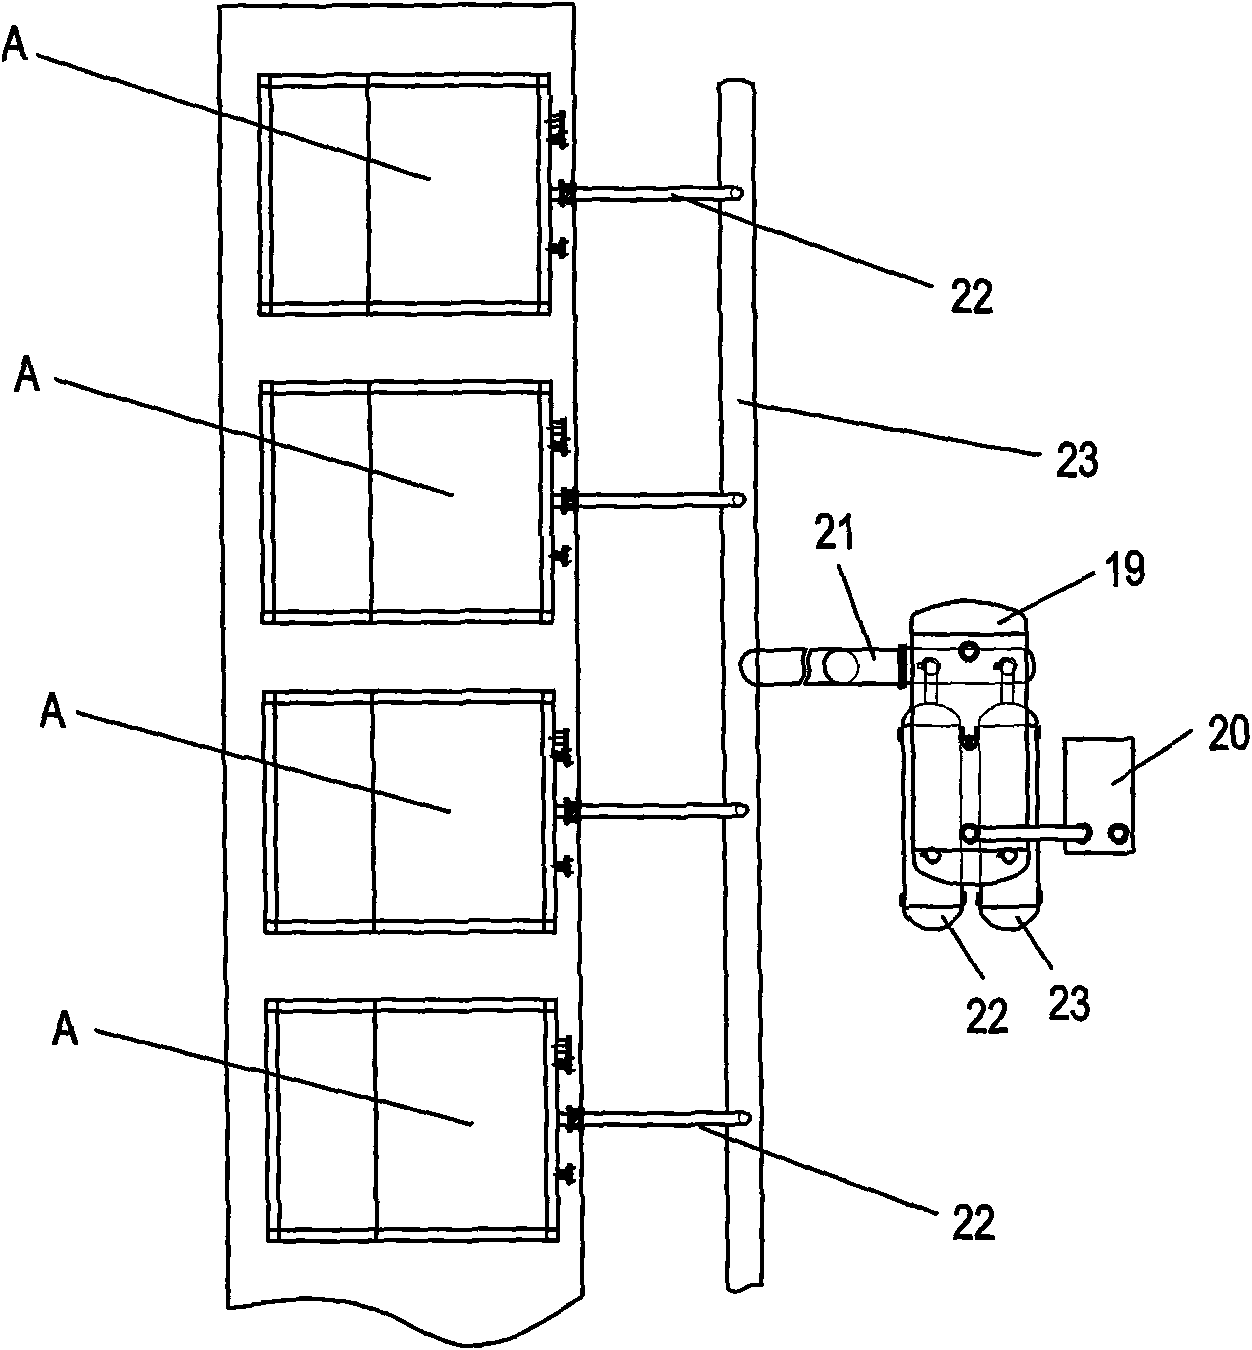 Fully-automatic molding machines for pulp molding and intermittent drainage vacuum devices thereof